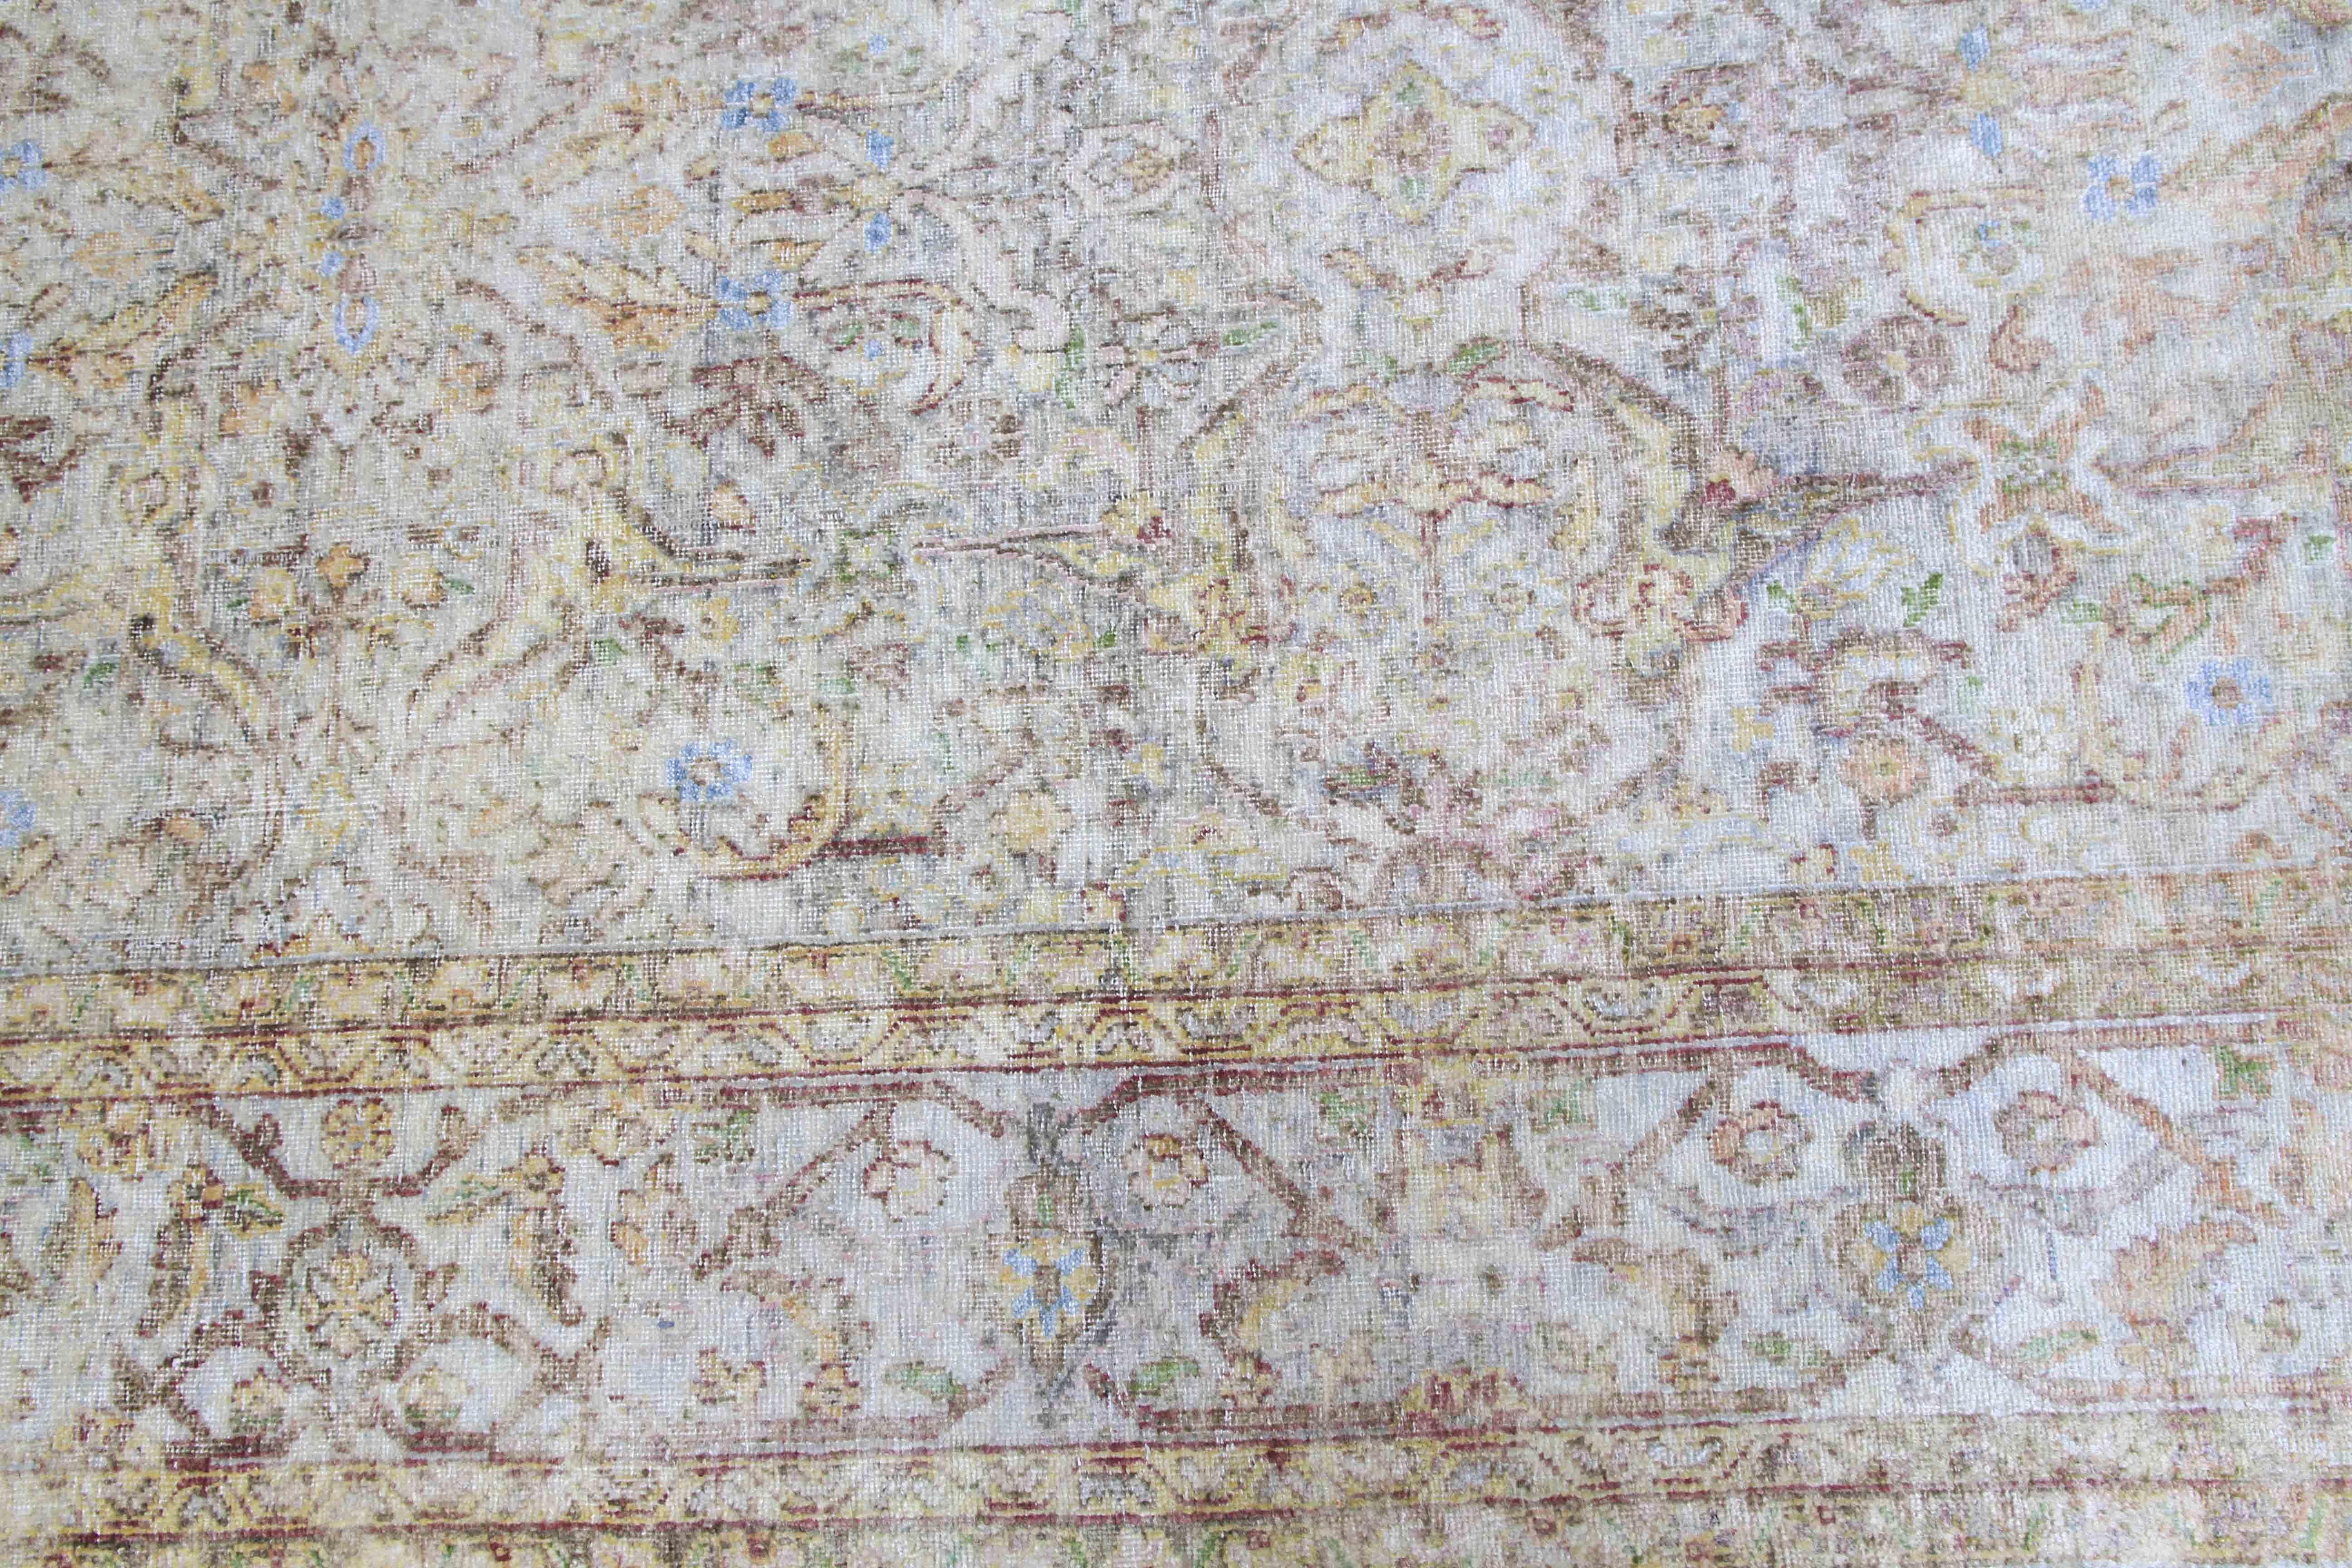 This distressed silk rug transforms the vintage style into a delicate modern look. The rug is transformed by artisans through a series of washing, sunning, and shearing - making iconic Persian motifs into a subtle tone-on-tone silk fabric feeling. 